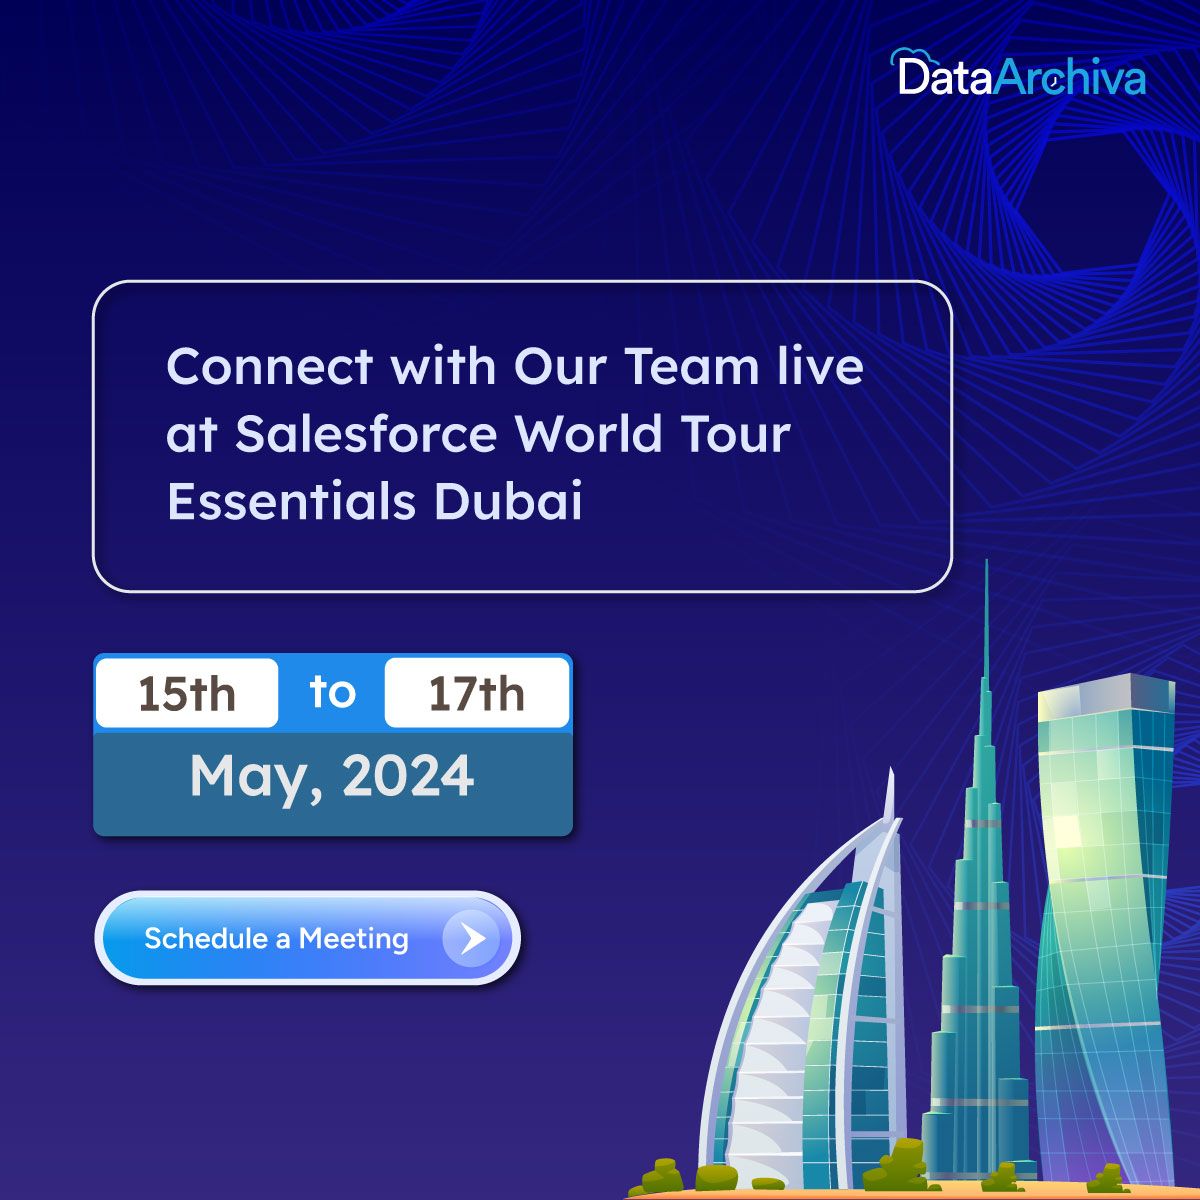 🌟 Join us in Dubai for the Salesforce World Tour Essentials and dive into the future of business! 🚀

Learn More ➡ buff.ly/3wtTkUf

#SalesforceTour #SalesforceWorldTour #WorldTourEssentials2024 #WorldTourEssentialsDubai #DataArchiva #Data #DataProtection